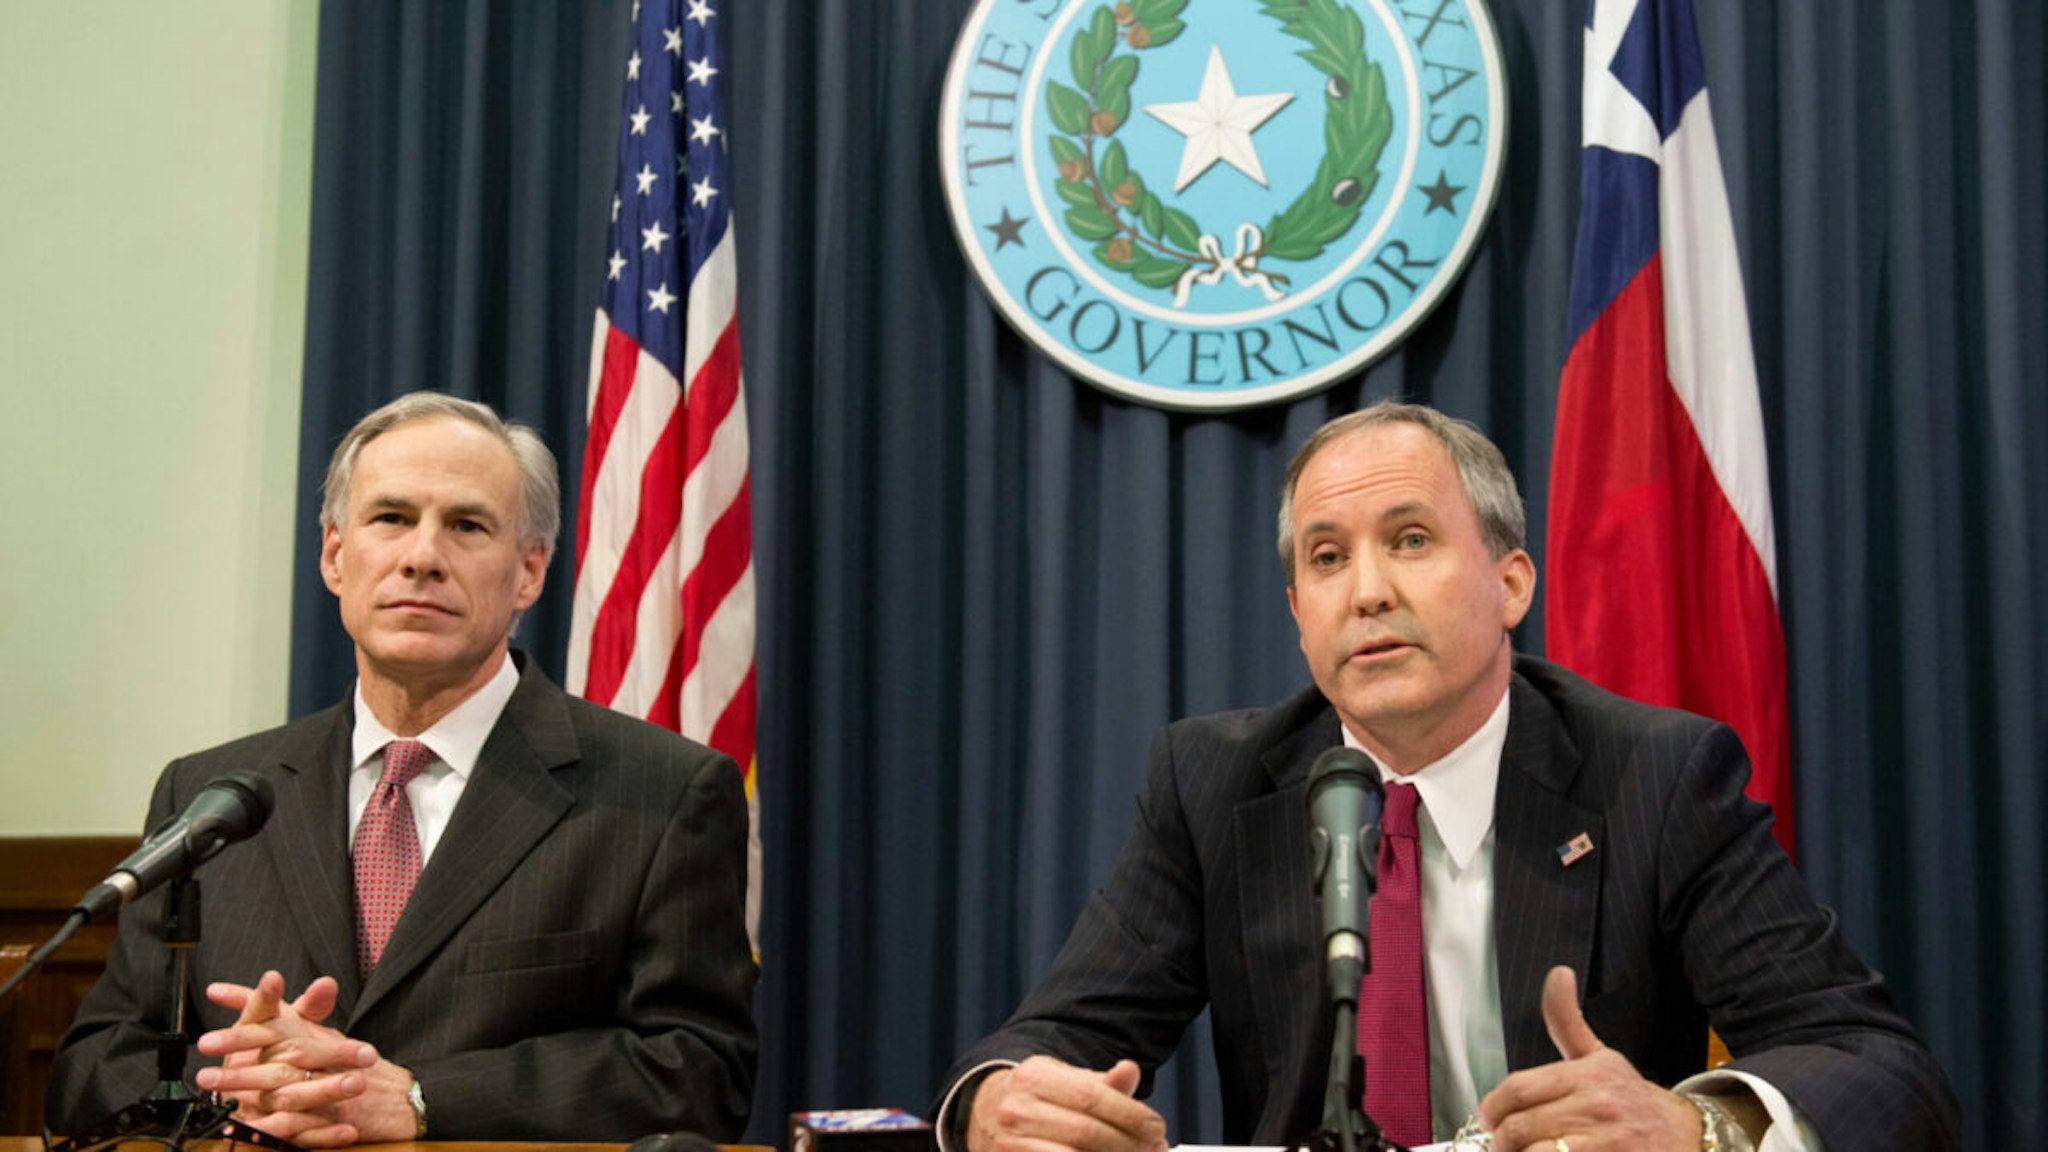 Texas Gov. Greg Abbott, l, and Attorney General Ken Paxton hold a press conference to address a Texas federal court's decision on the immigration lawsuit filed by 26 states challenging President Obama.